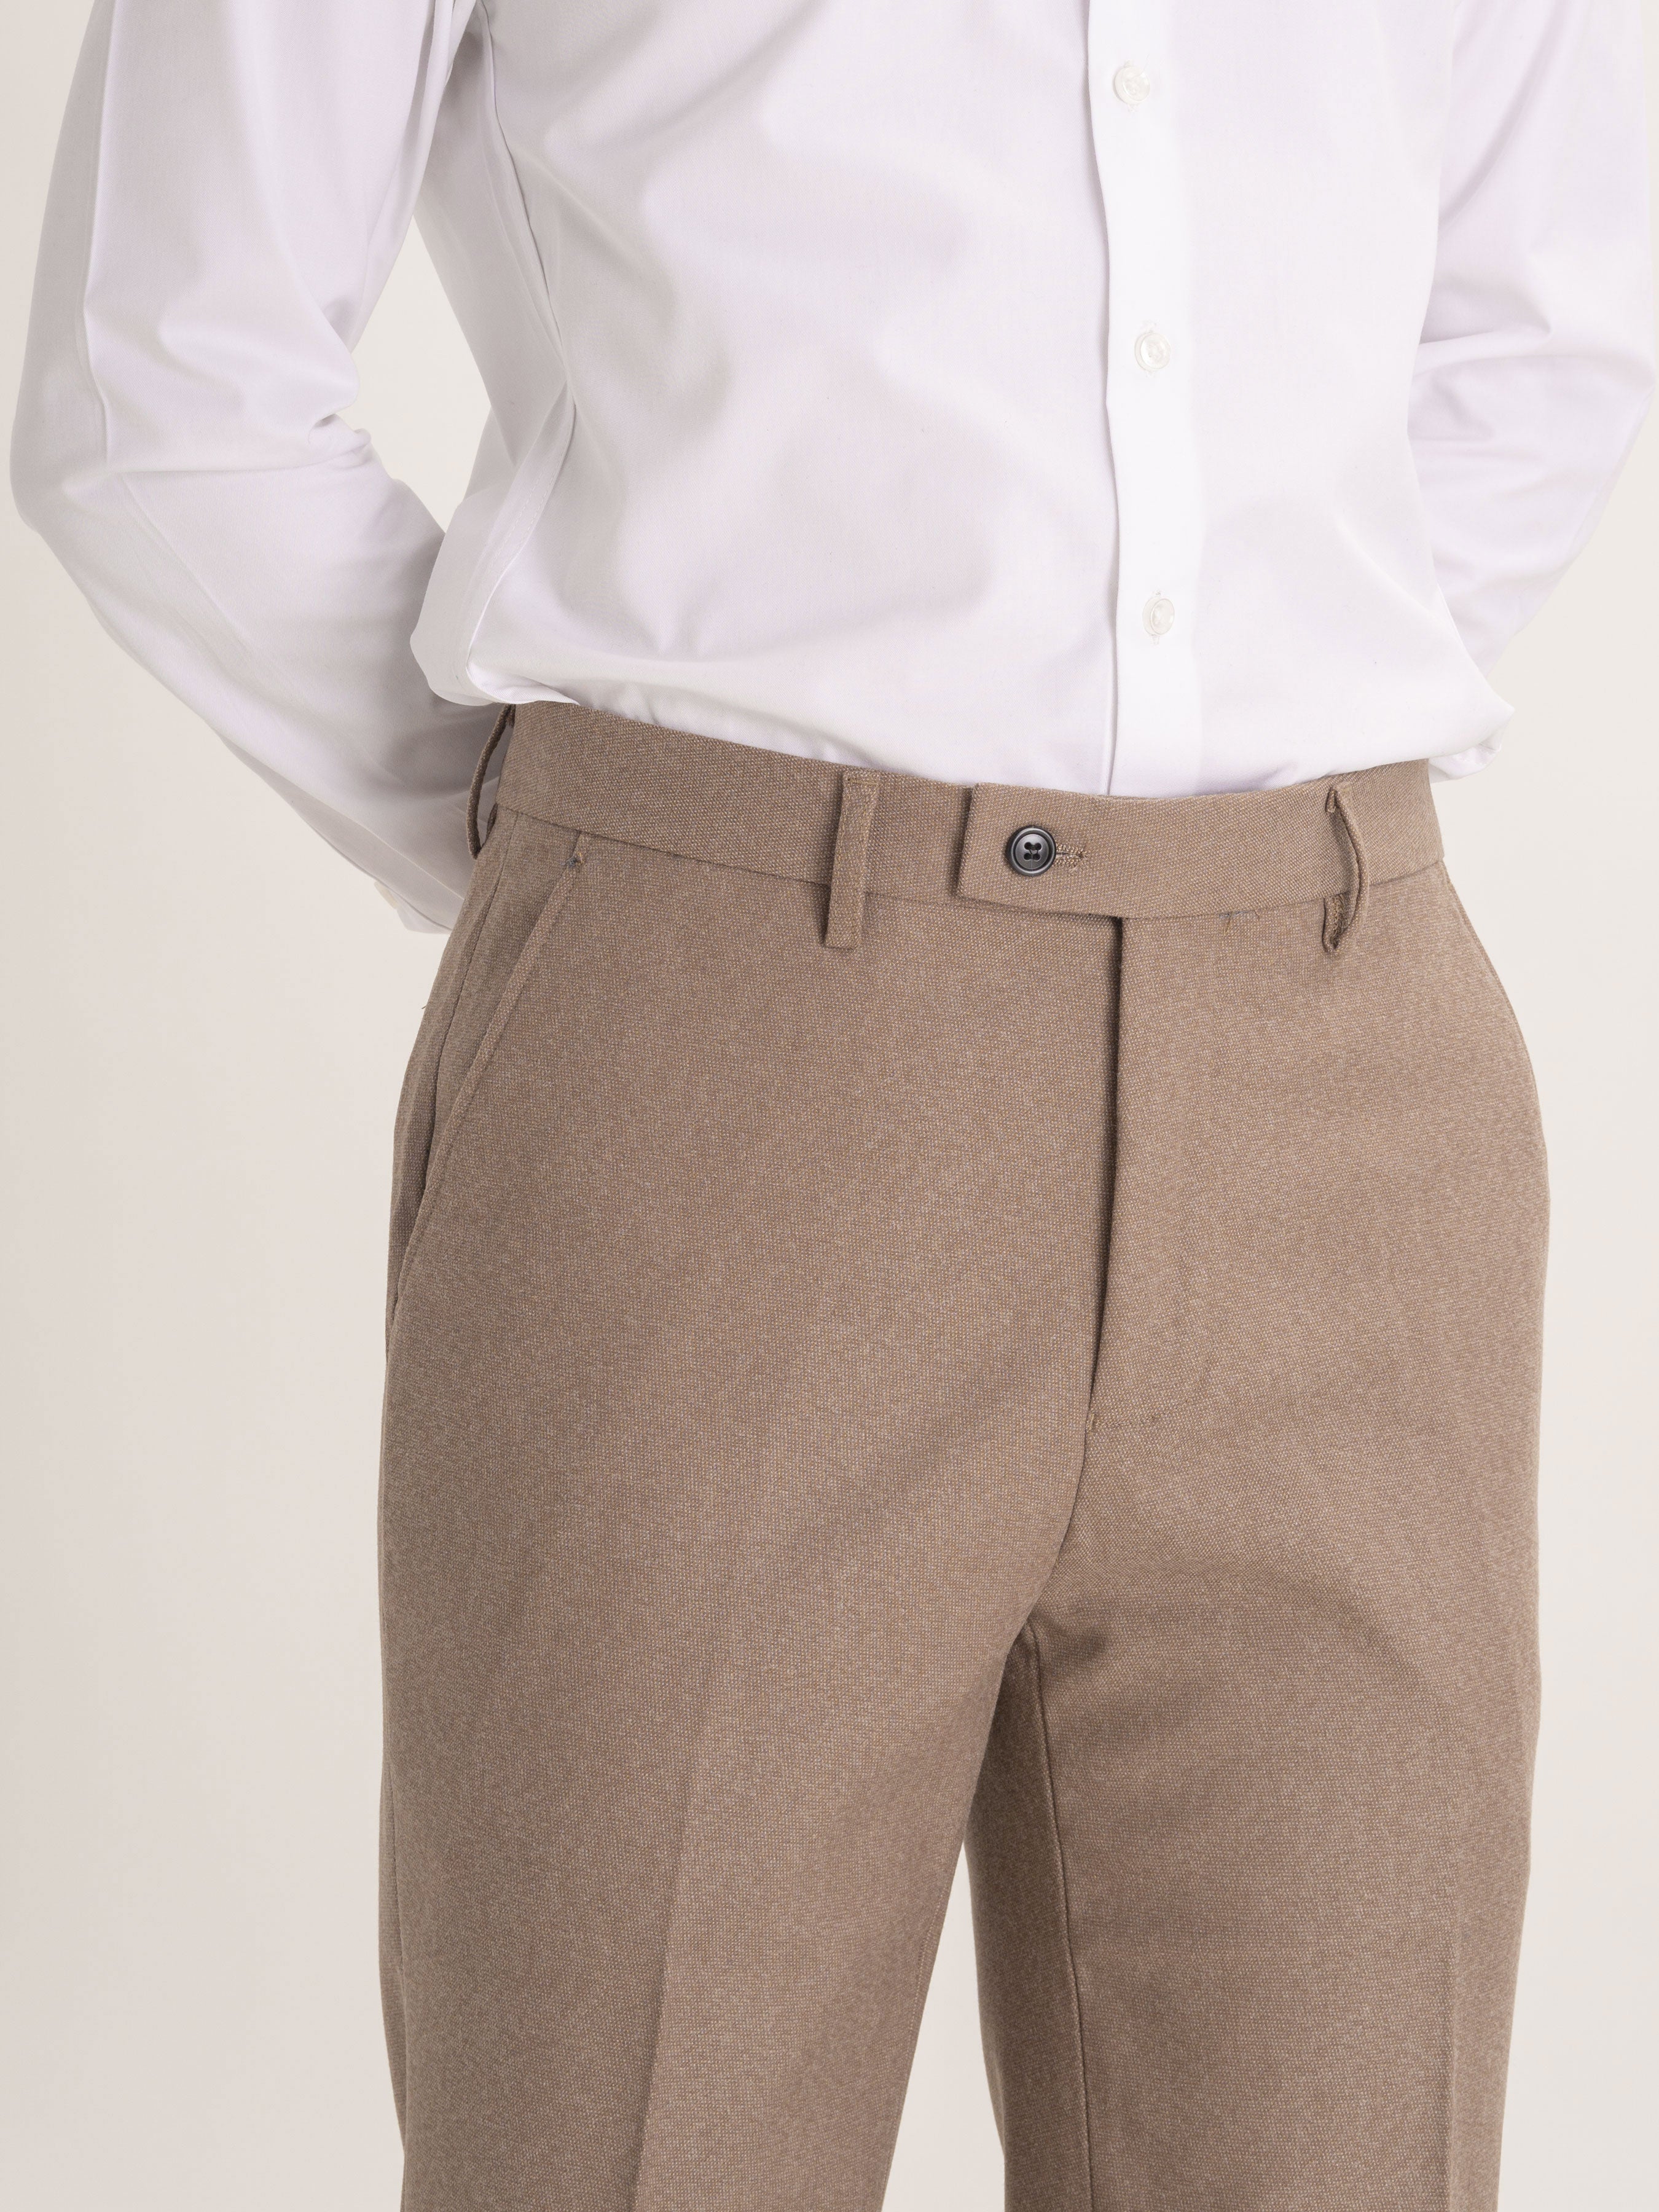 Trousers With Belt Loop - Light Brown Plain (Stretchable) - Zeve Shoes